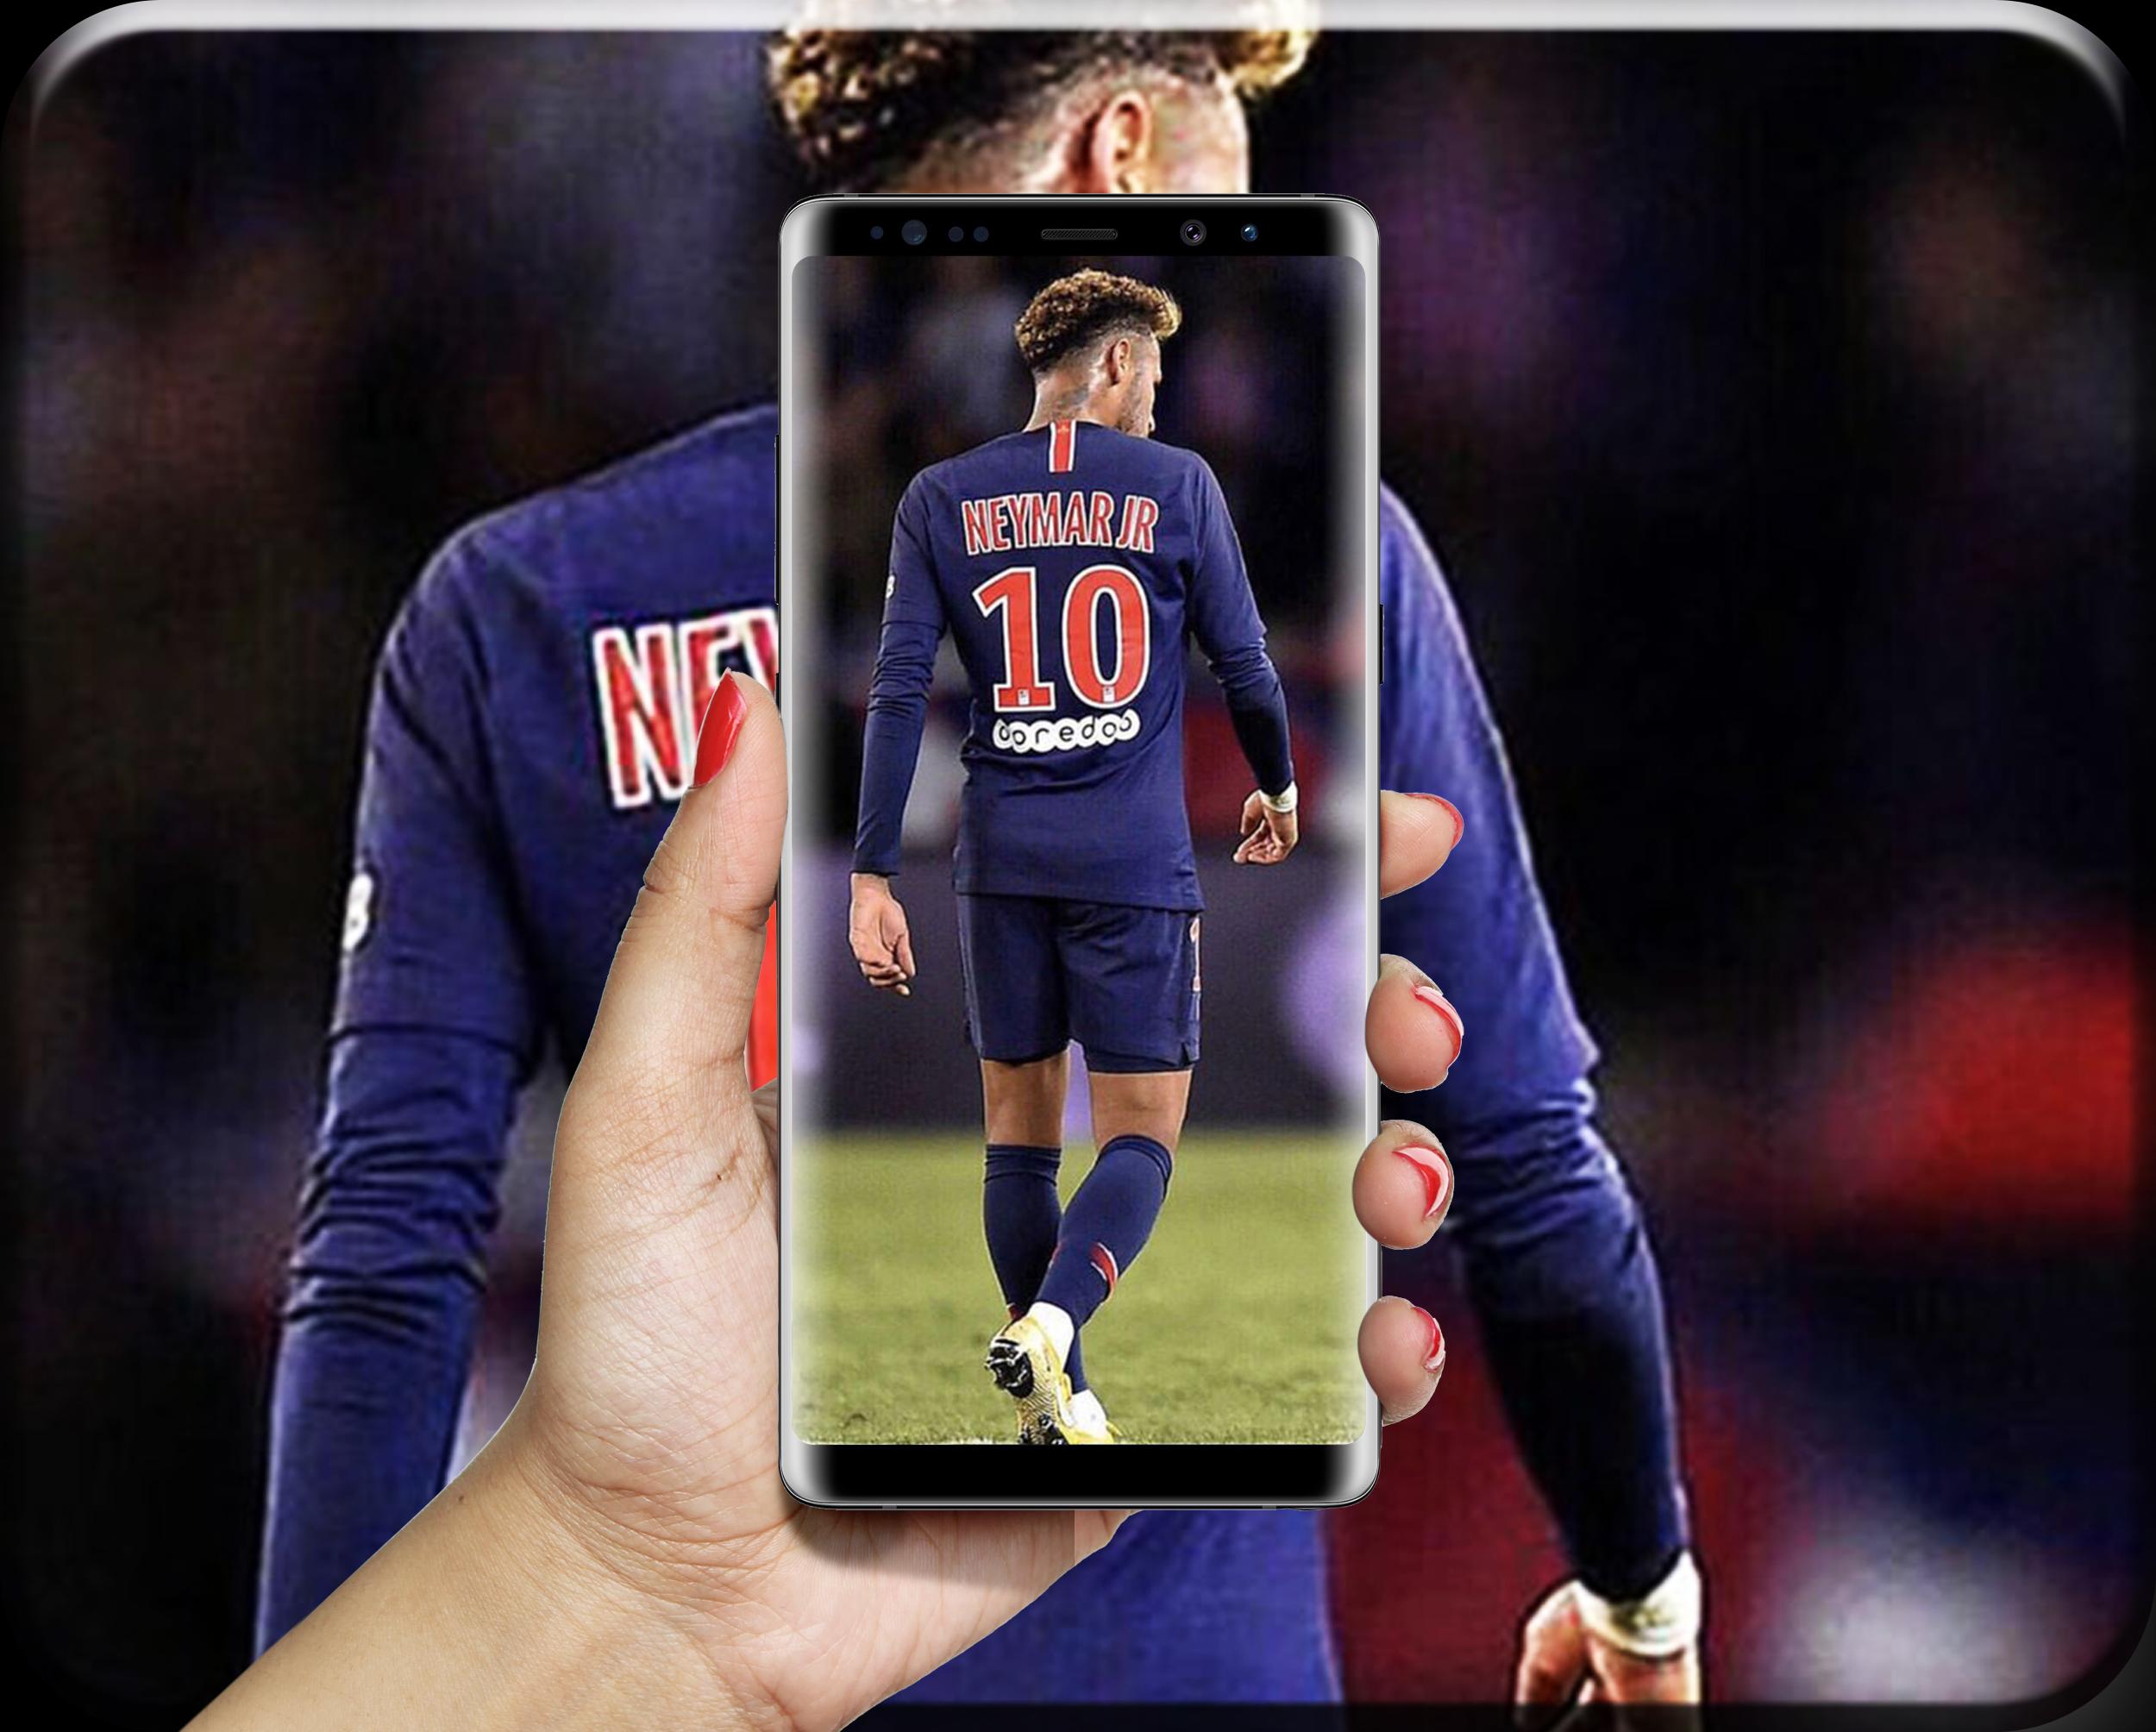 Neymar Jr Wallpapers Hd 4k For Android Apk Download